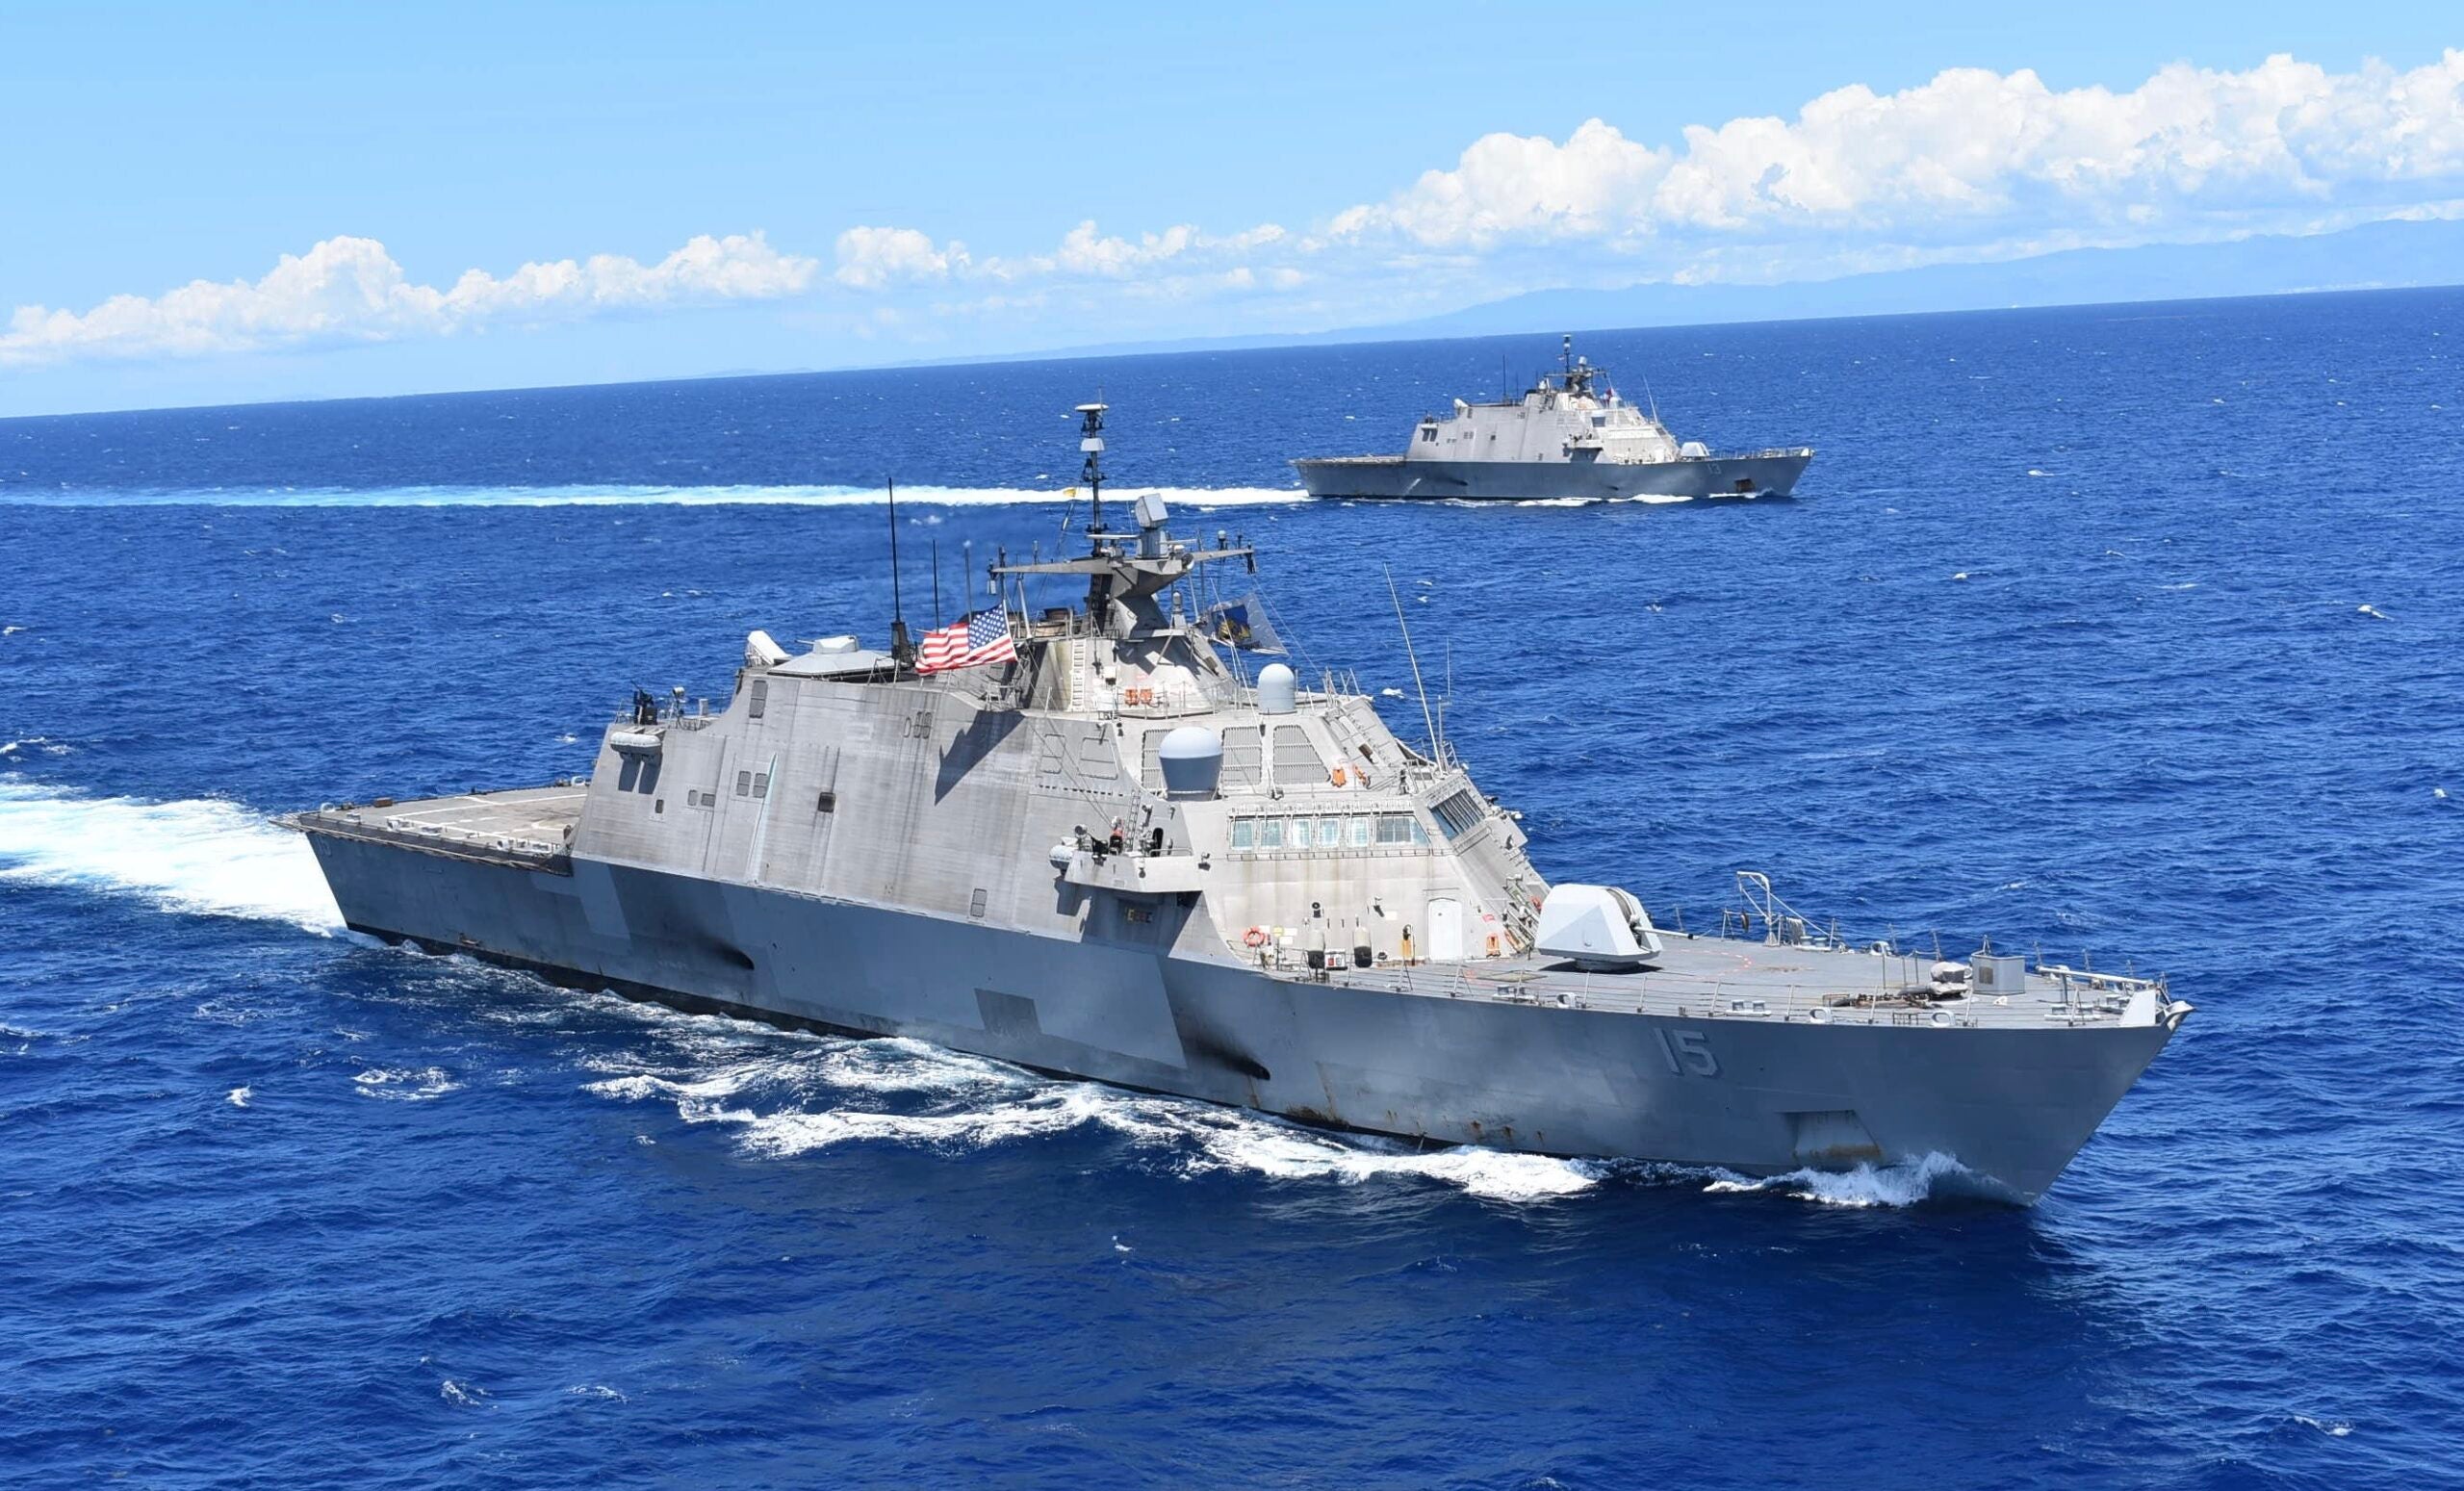 220910-N-N3764-2001

Caribbean Sea - (Sept. 10, 2022) — The Freedom-variant littoral combat ships USS Billings (LCS 15) and USS Wichita (LCS 13) participate in a photo exercise in the Caribbean Sea, Sept. 10, 2022. Wichita and Billings are deployed to the U.S. 4th Fleet area of operations to support Joint Interagency Task Force South’s mission, which includes counter-illicit drug trafficking missions in the Caribbean and Eastern Pacific. (U.S. Navy photo by Mineman 2nd Class Justin Hovarter/Released)